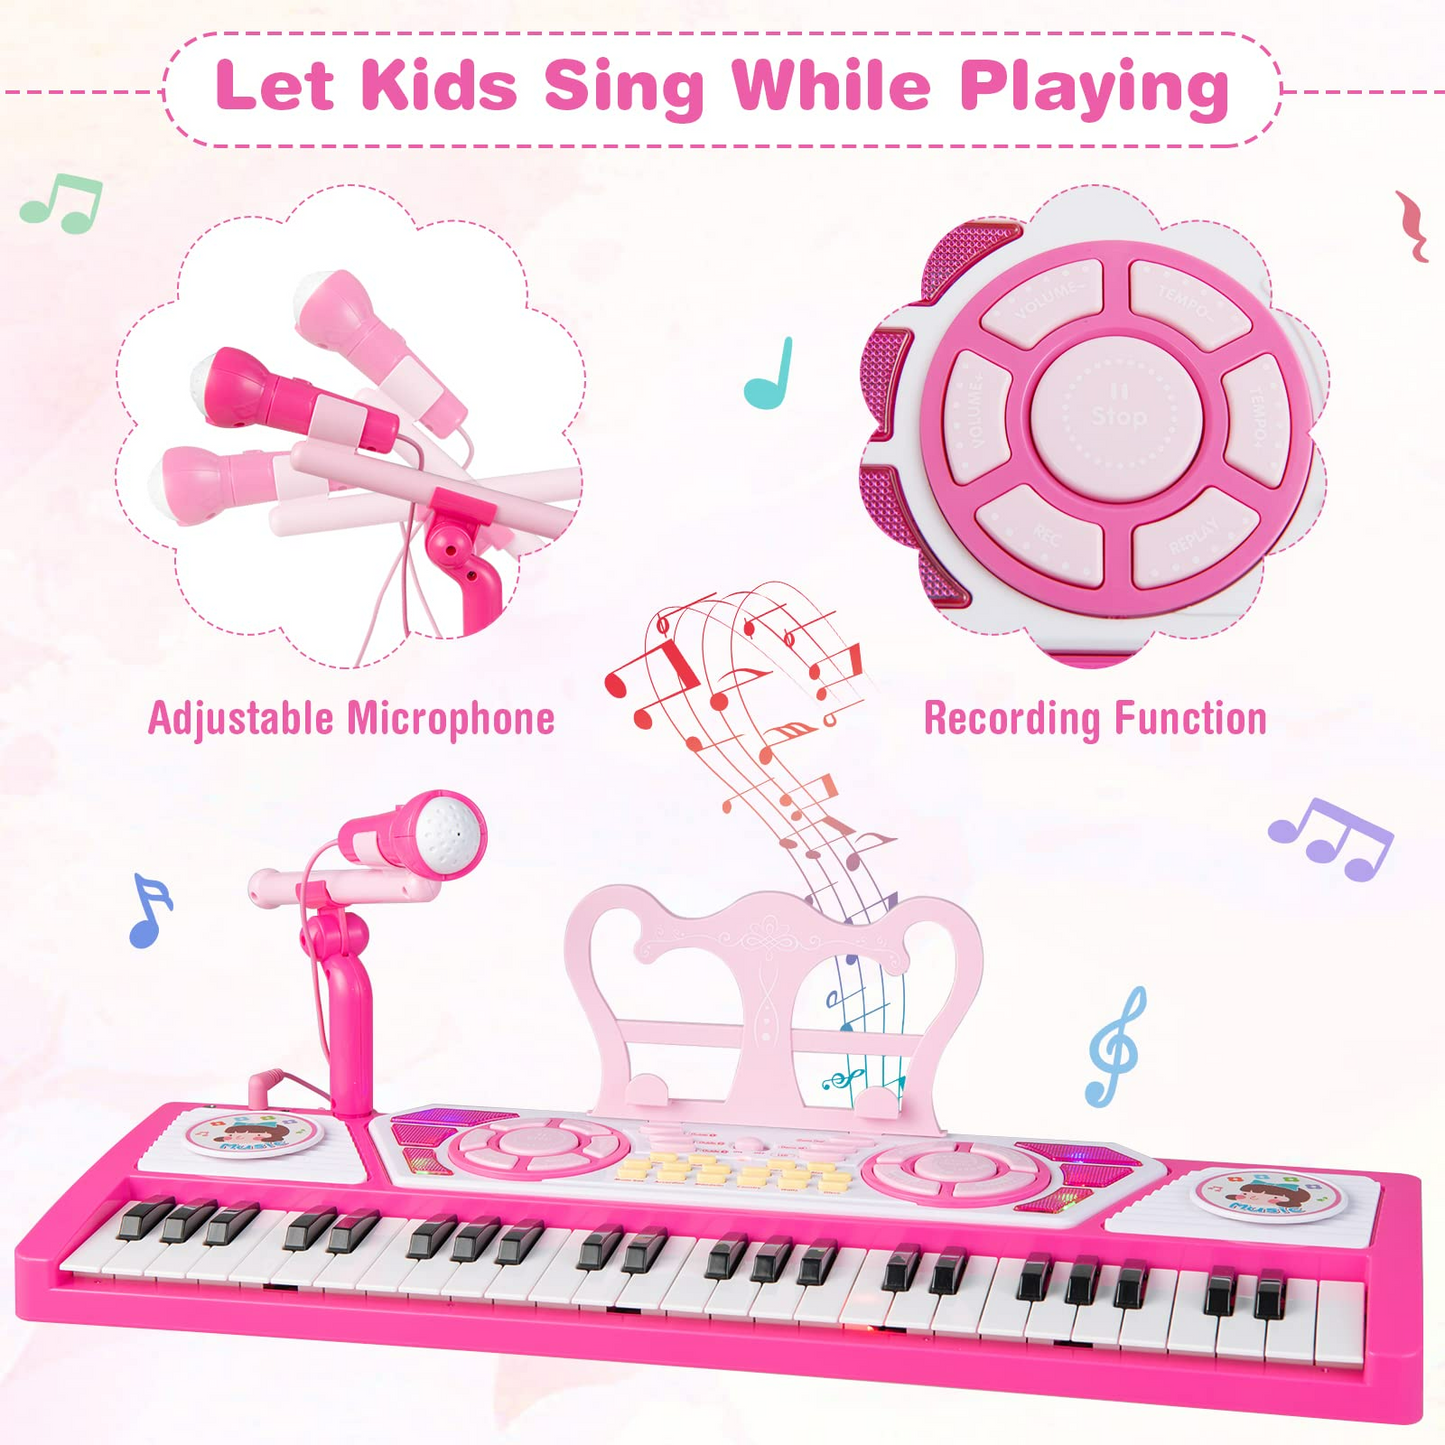 OLAKIDS 49 Keys Kids Piano Keyboard with Microphone, Portable Electronic Musical Instrument Toy OLAKIDS